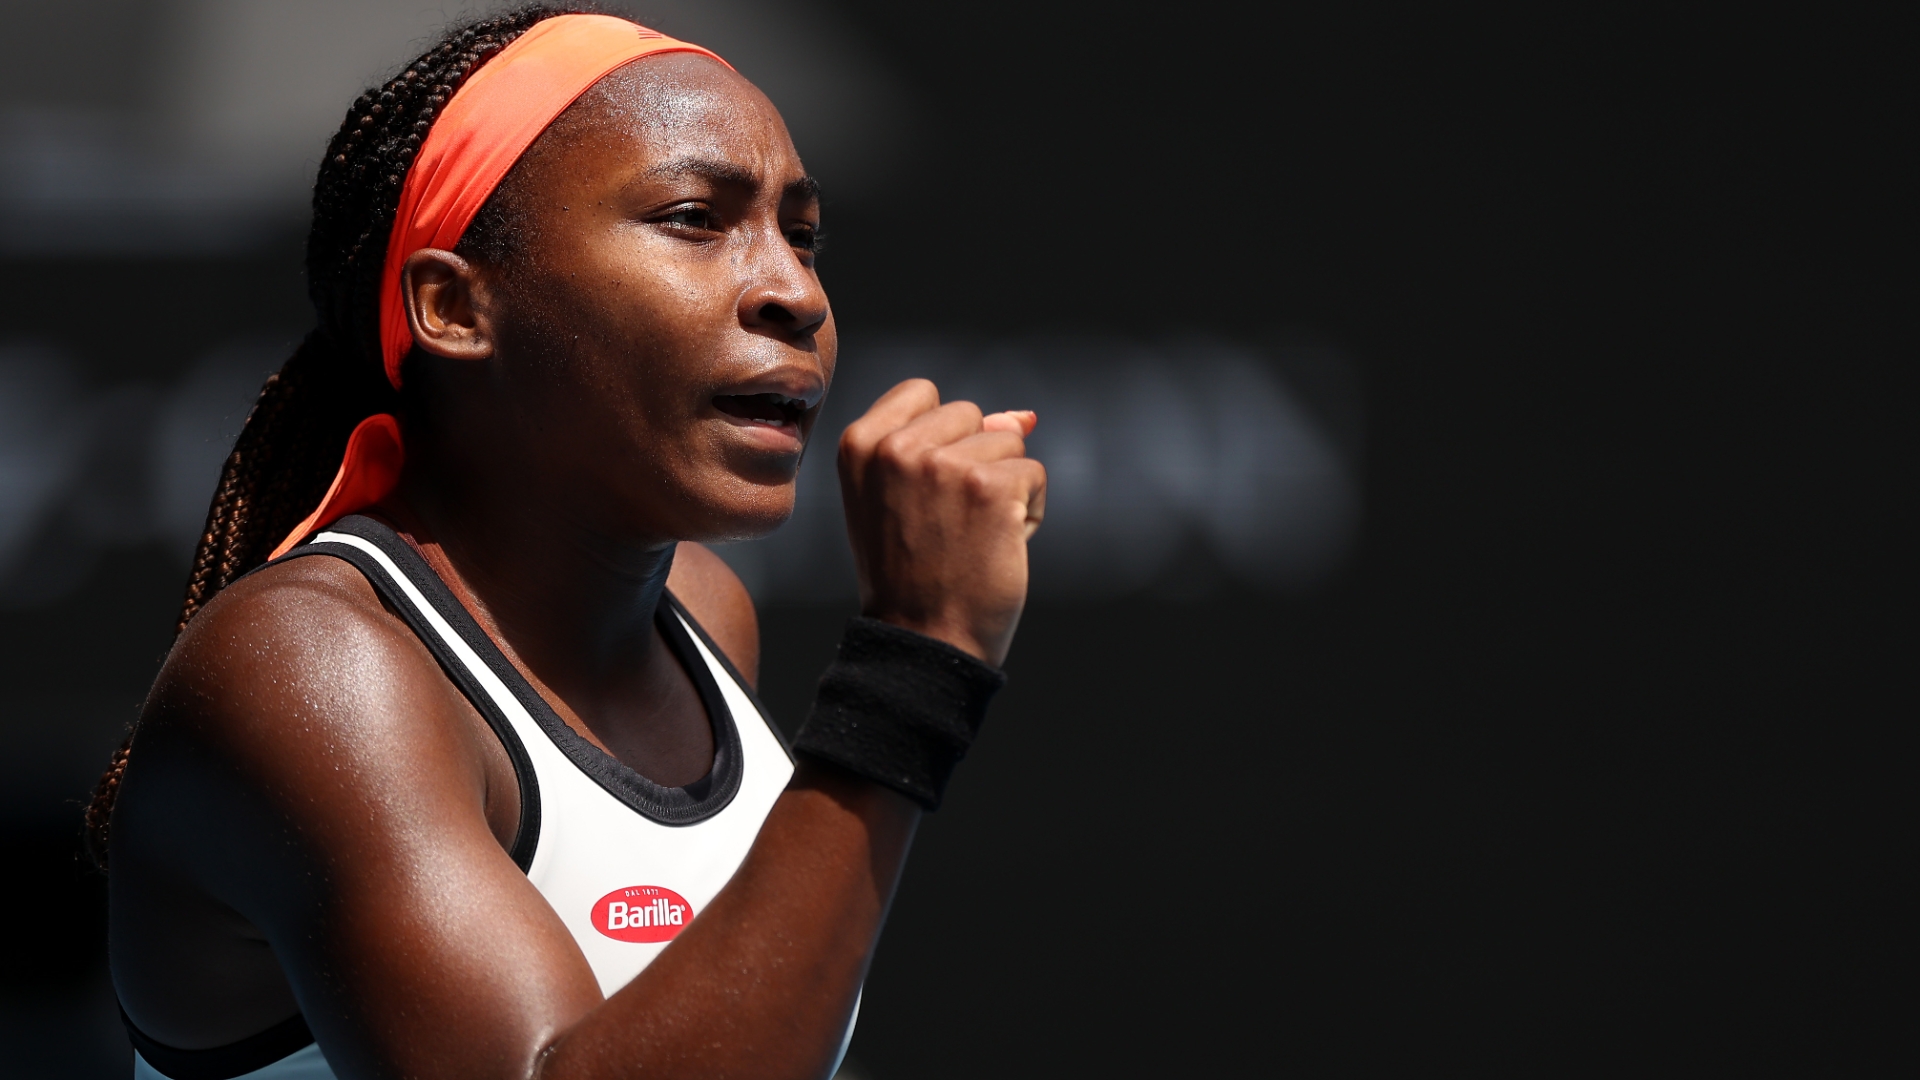 Coco Gauff advances to the 2nd round of the Australian Open - Stream the Video